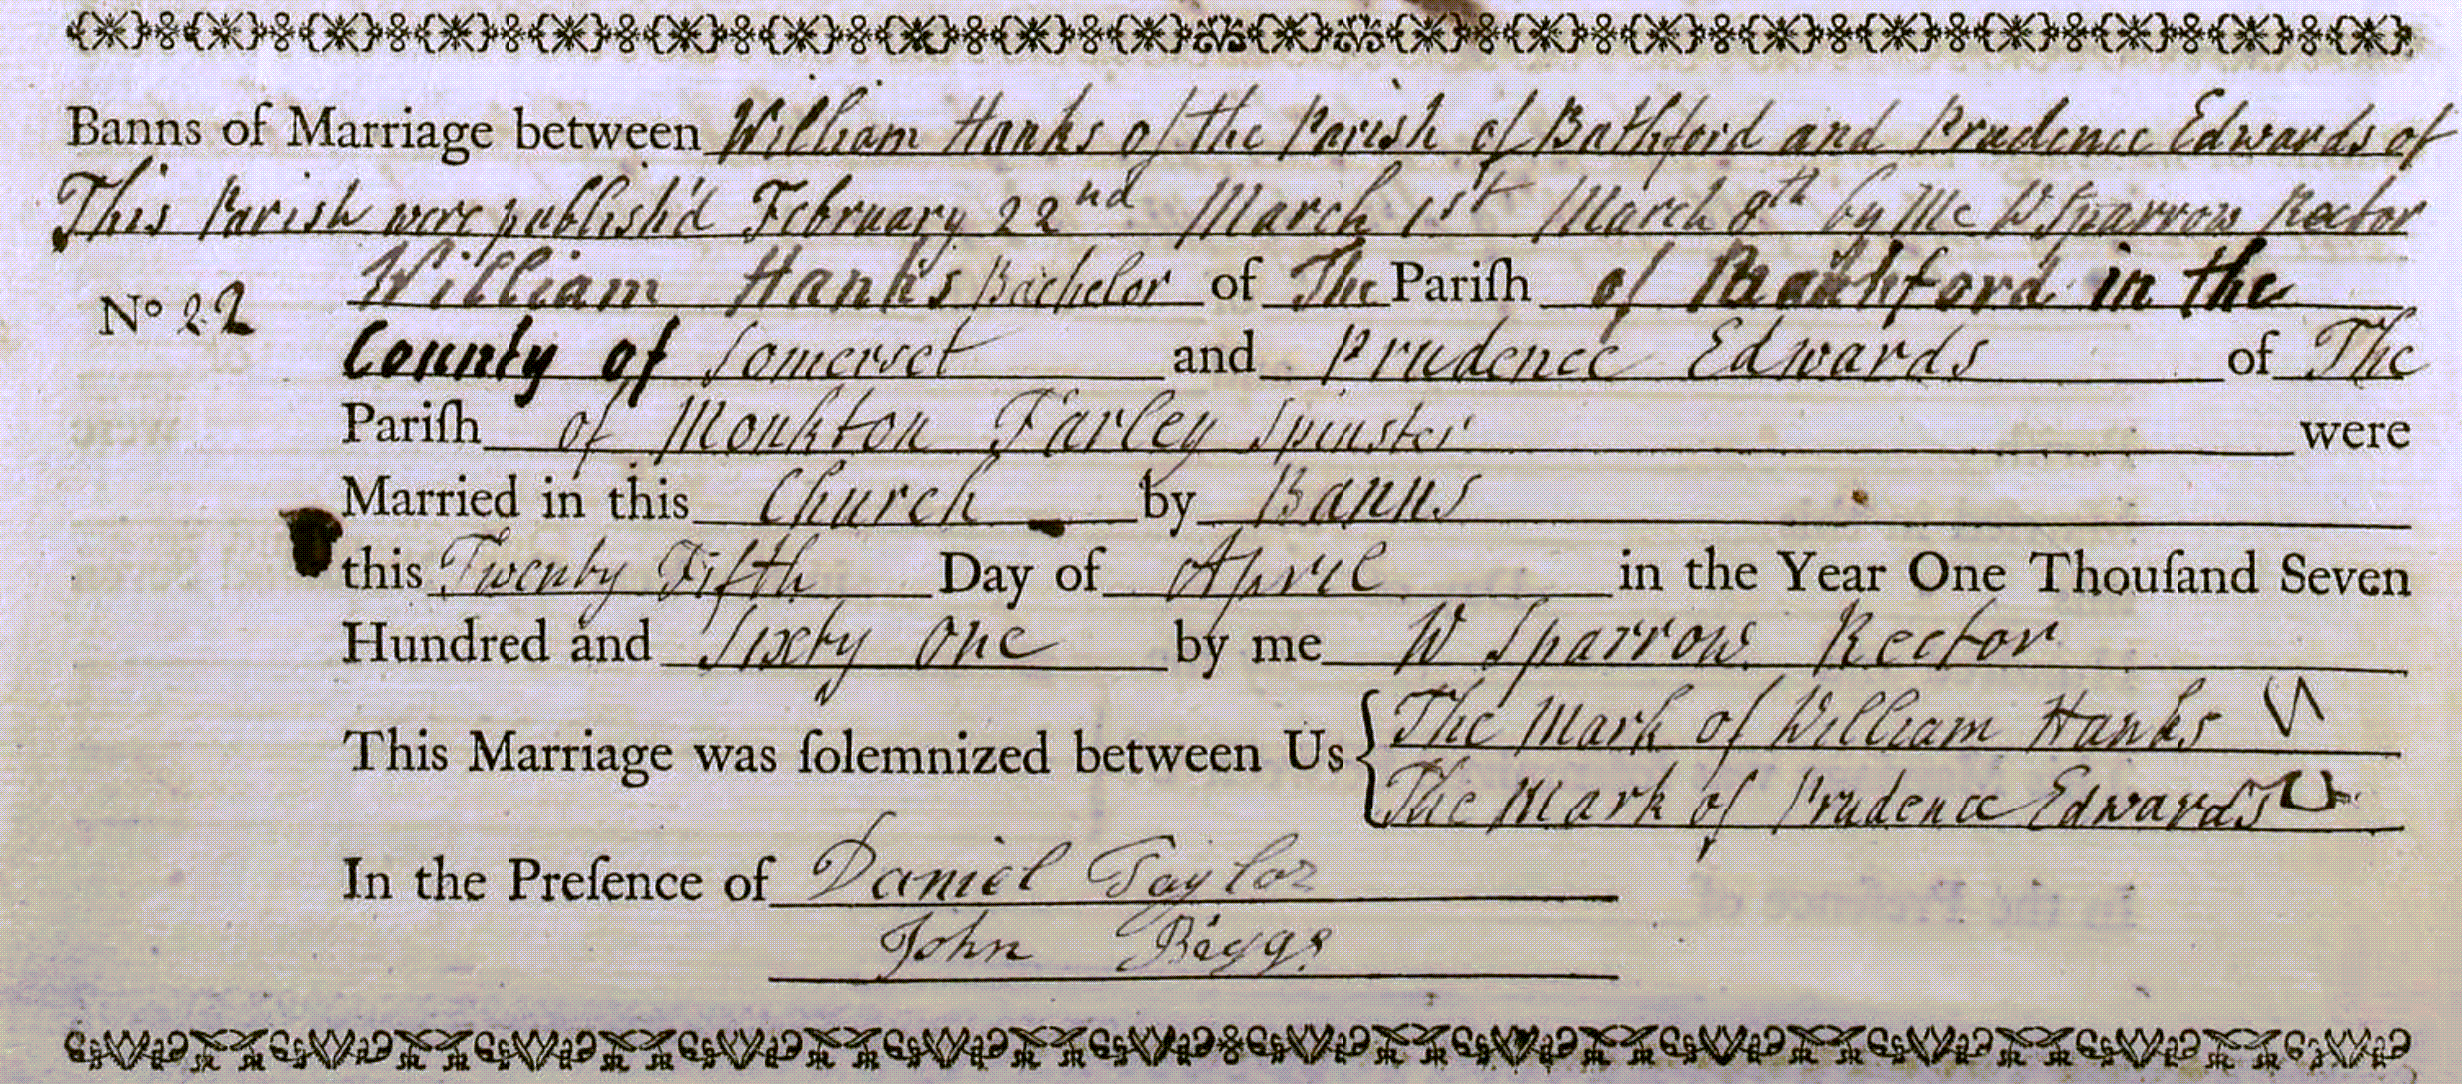 Figure 2: Marriage Register Entry for william Hanks and Prudence Edwards